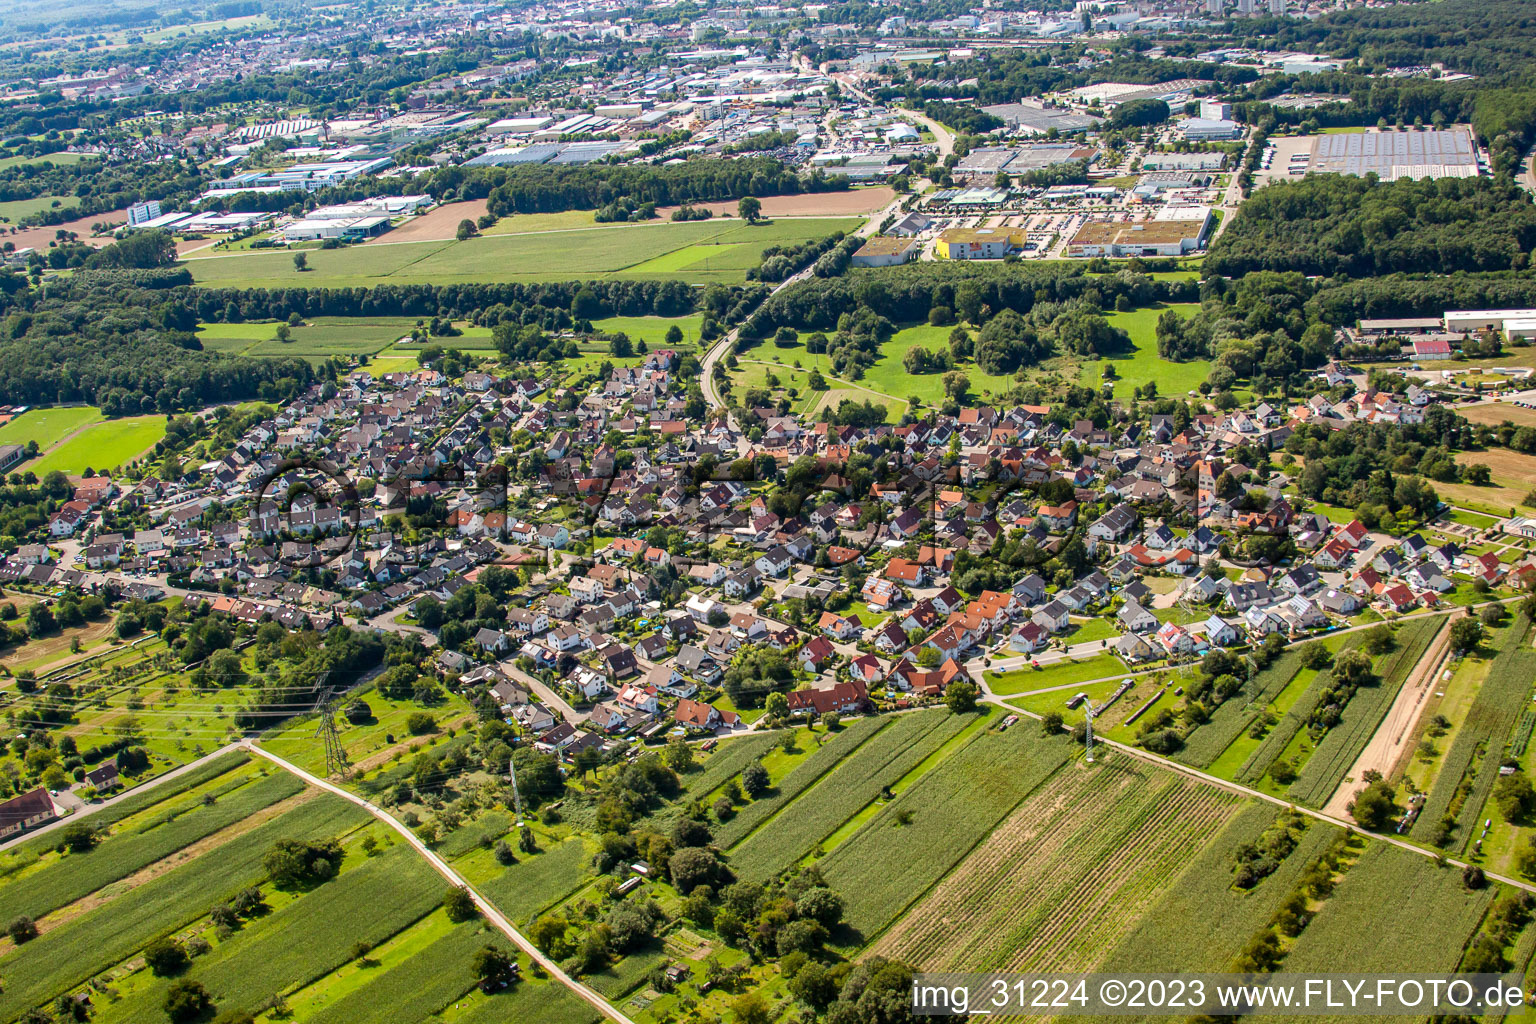 From the east in the district Rauental in Rastatt in the state Baden-Wuerttemberg, Germany